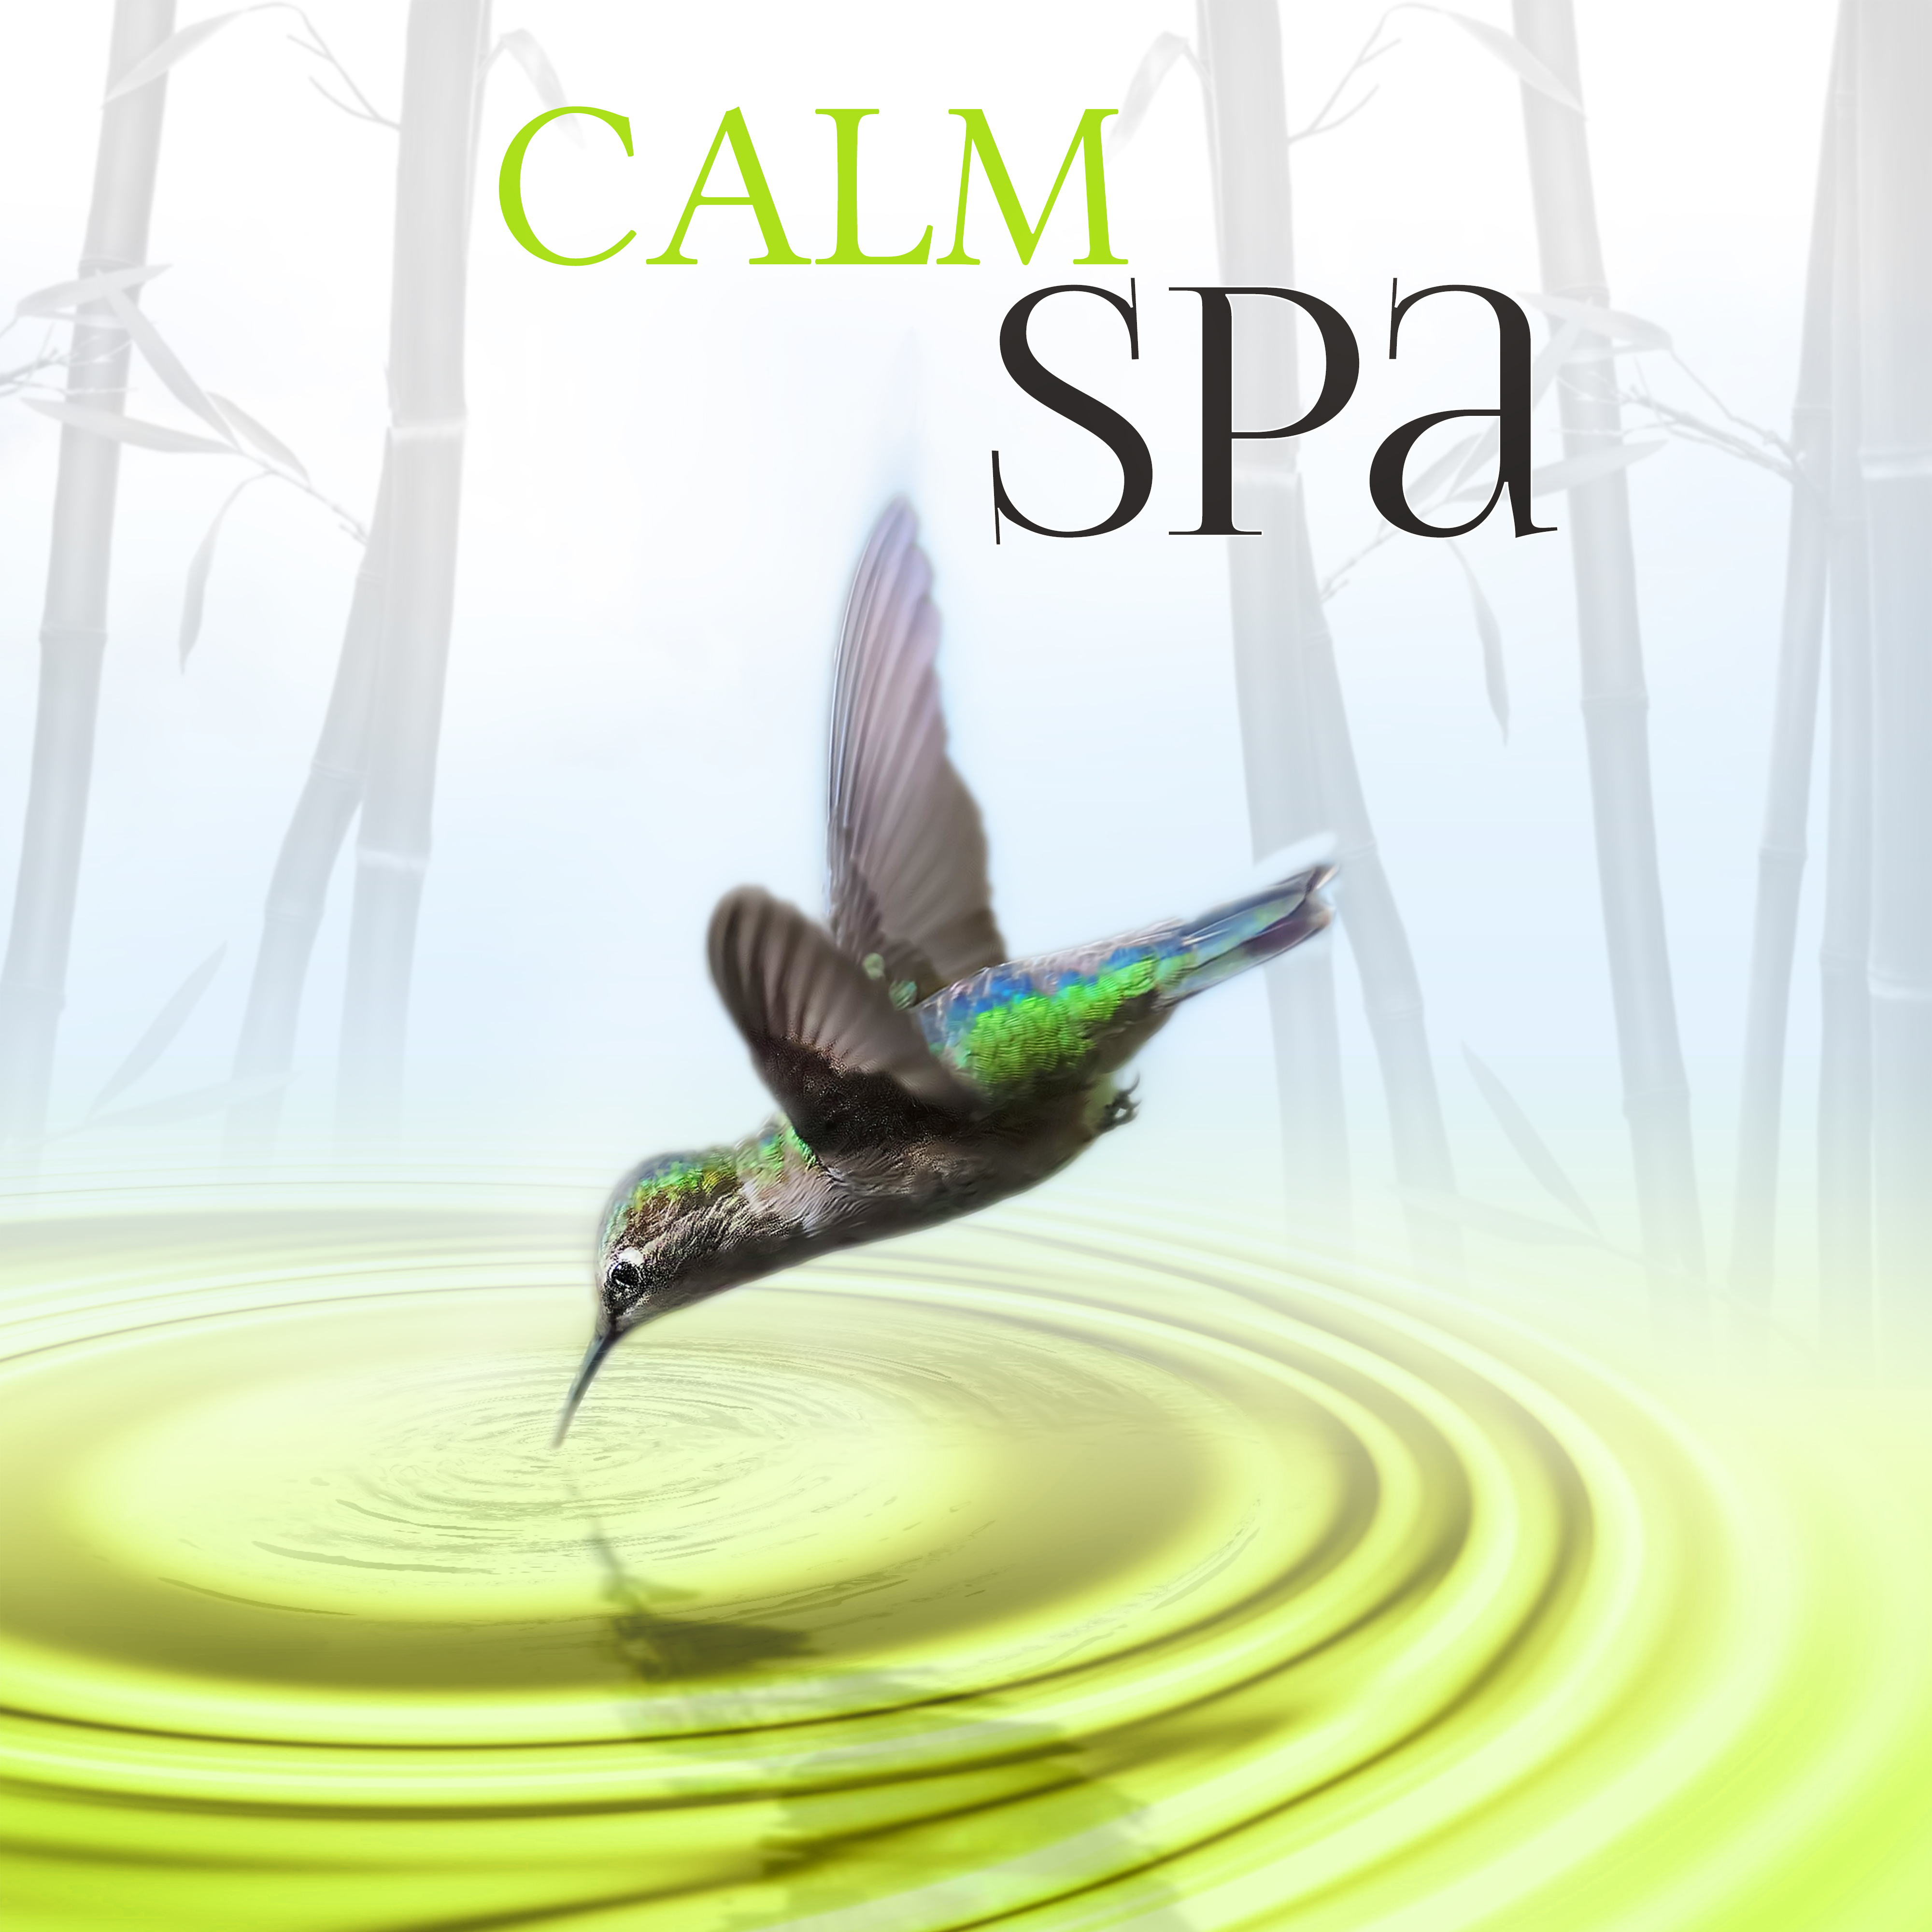 Calm Spa  Bliss Spa, Time for Me, Easy Listening, Nature Sounds, Calm Down, Gentle Ambient Music